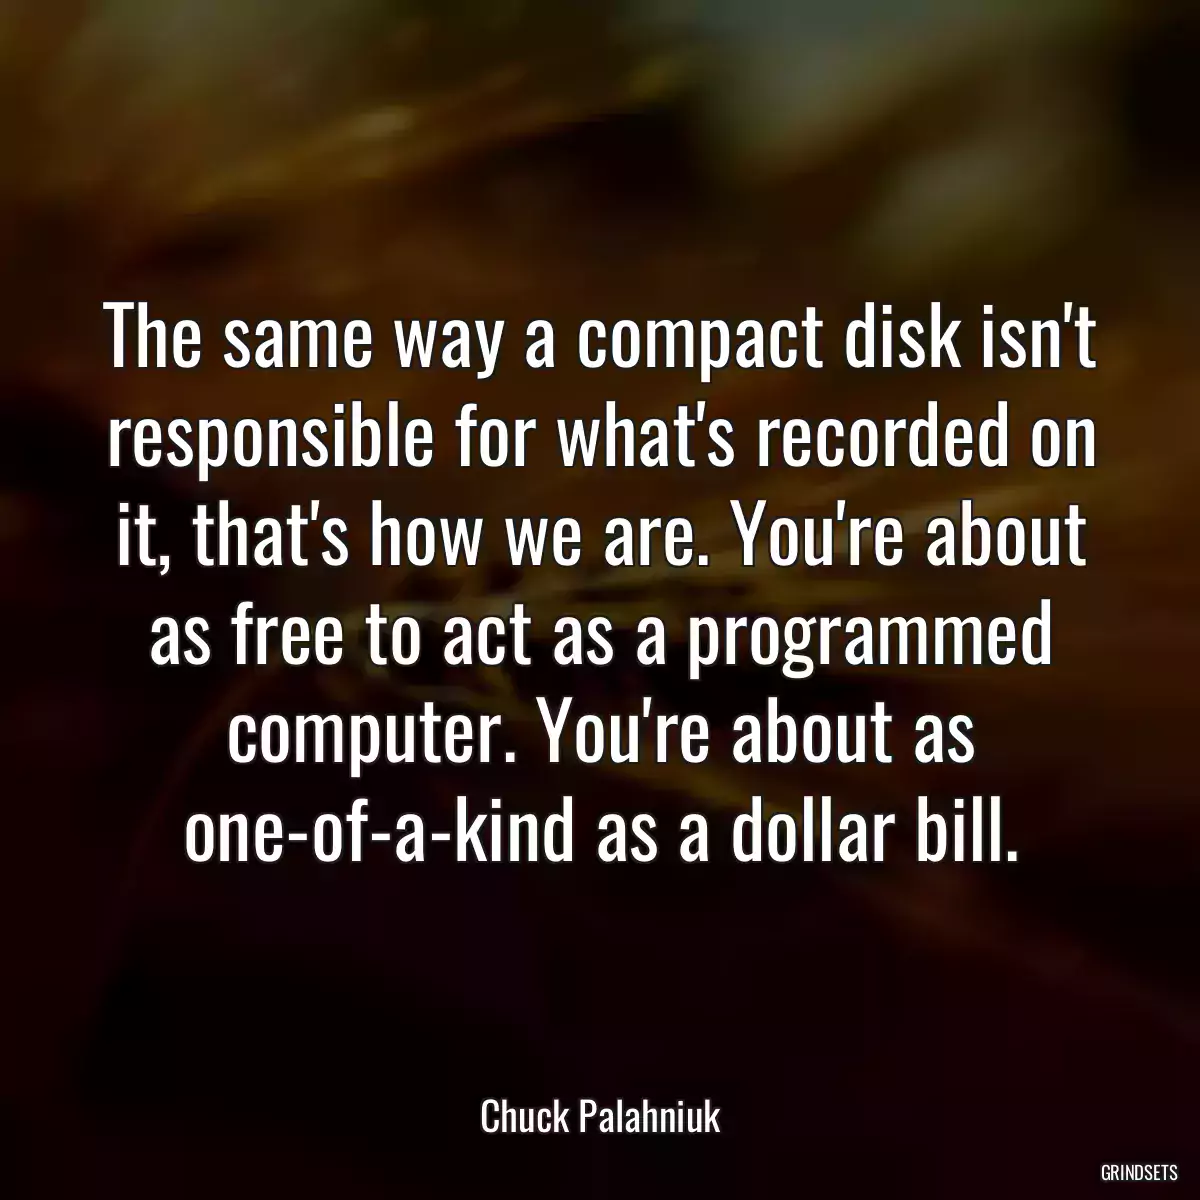 The same way a compact disk isn\'t responsible for what\'s recorded on it, that\'s how we are. You\'re about as free to act as a programmed computer. You\'re about as one-of-a-kind as a dollar bill.